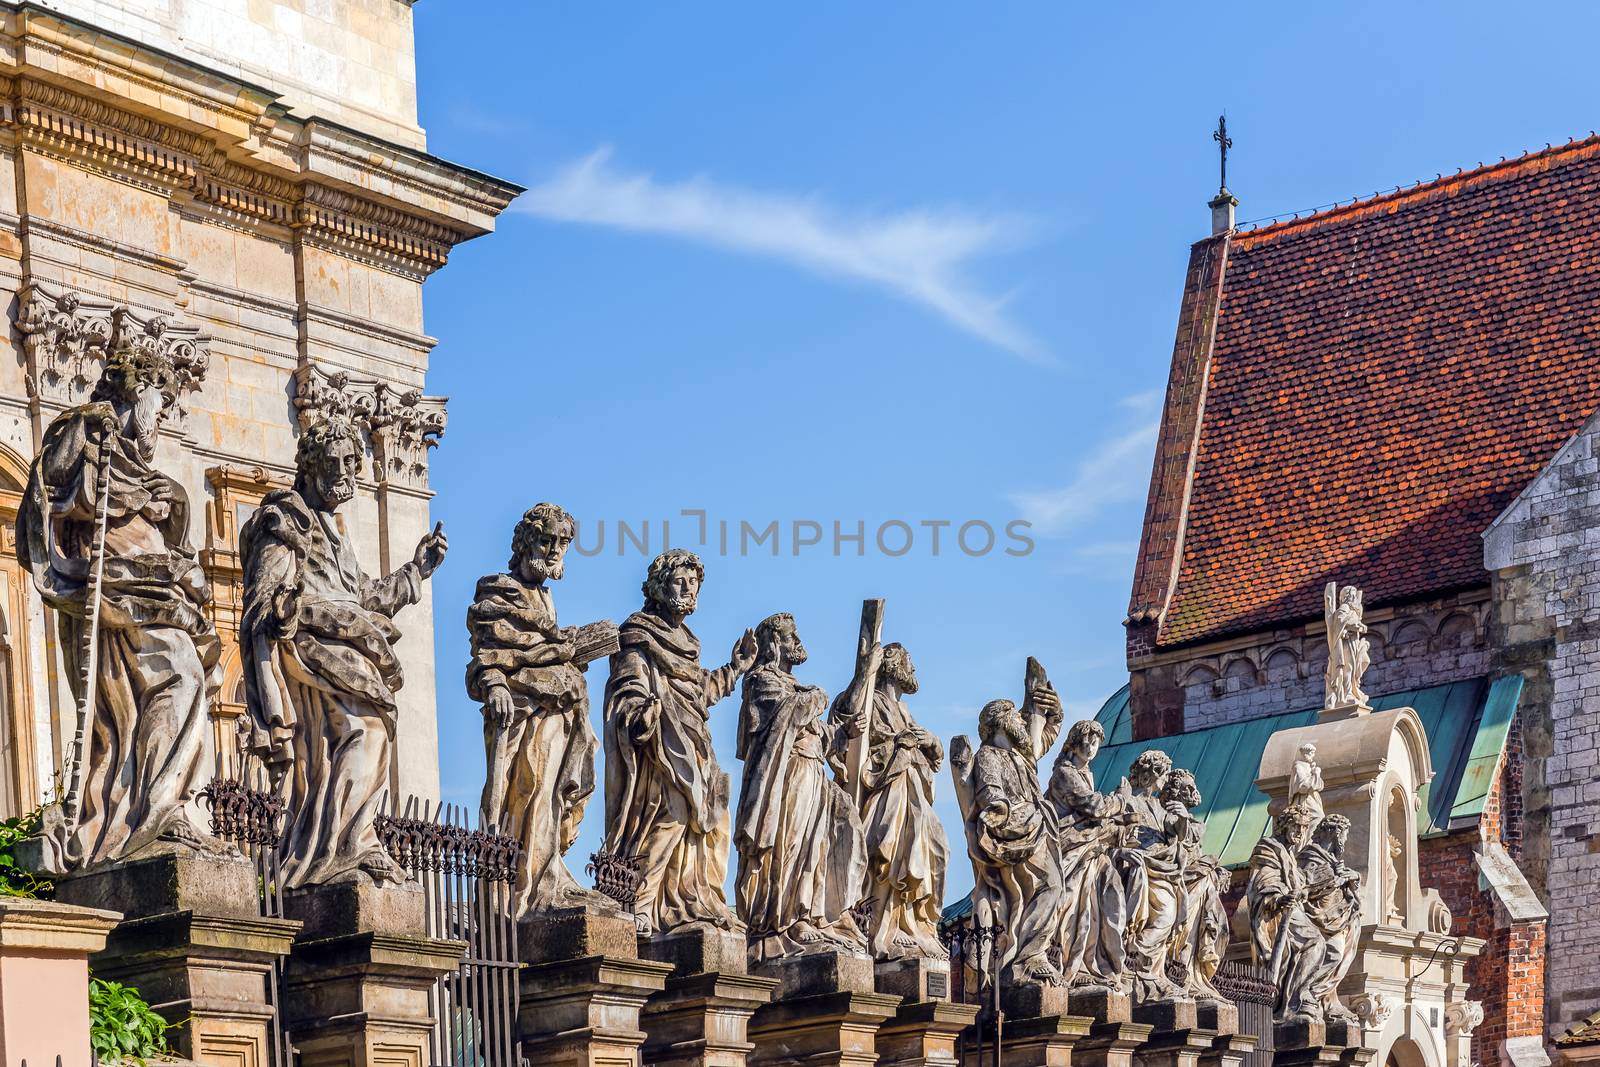 Statues of the Saints in front of The Church of Saints Peter and Paul, built in Baroque style, in Krakow, Poland.